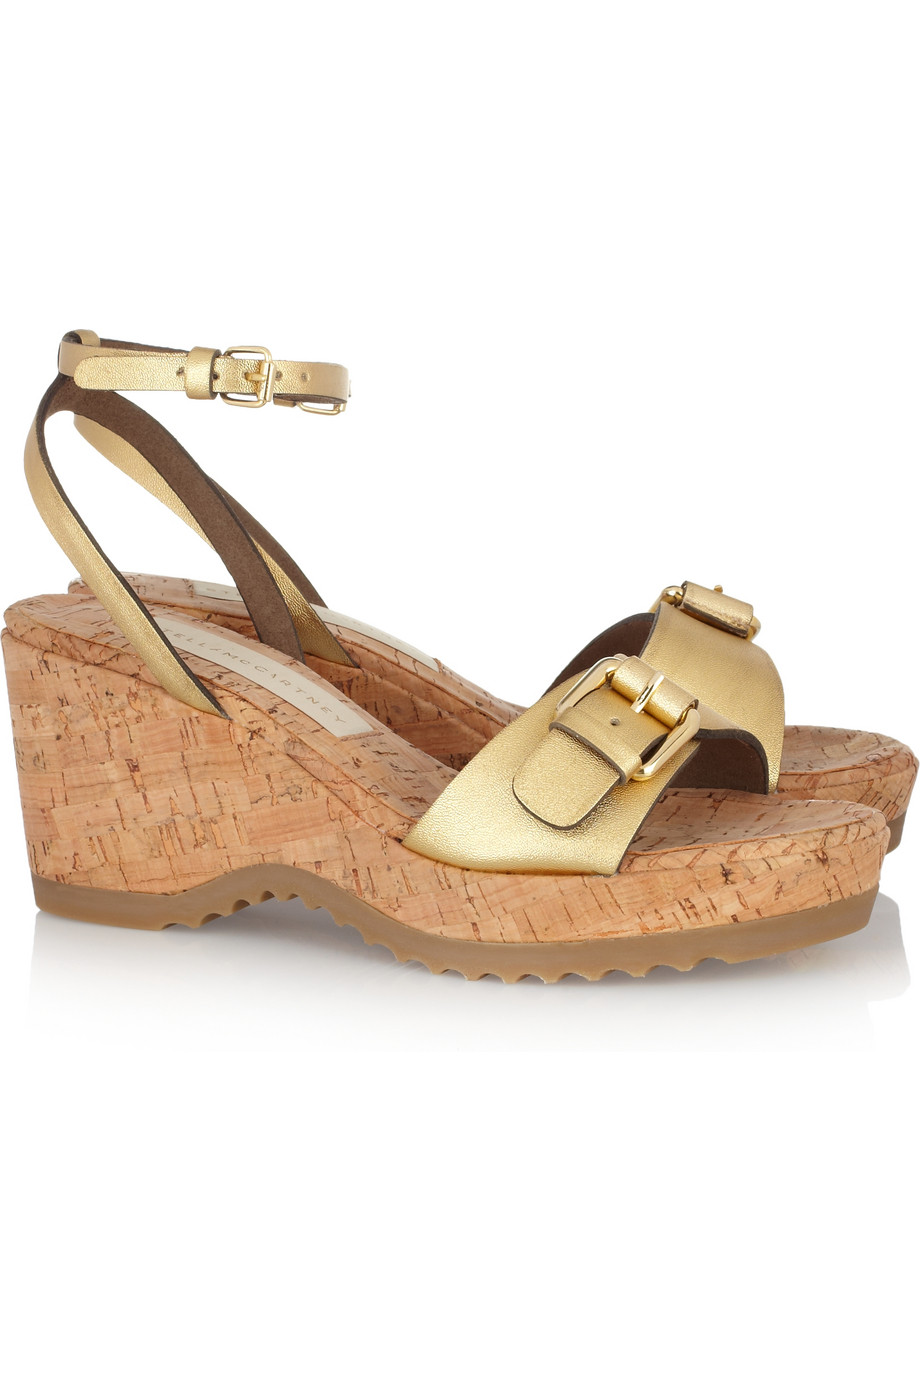 Stella Mccartney Metallic Faux Leather and Cork Wedge Sandals in Gold ...